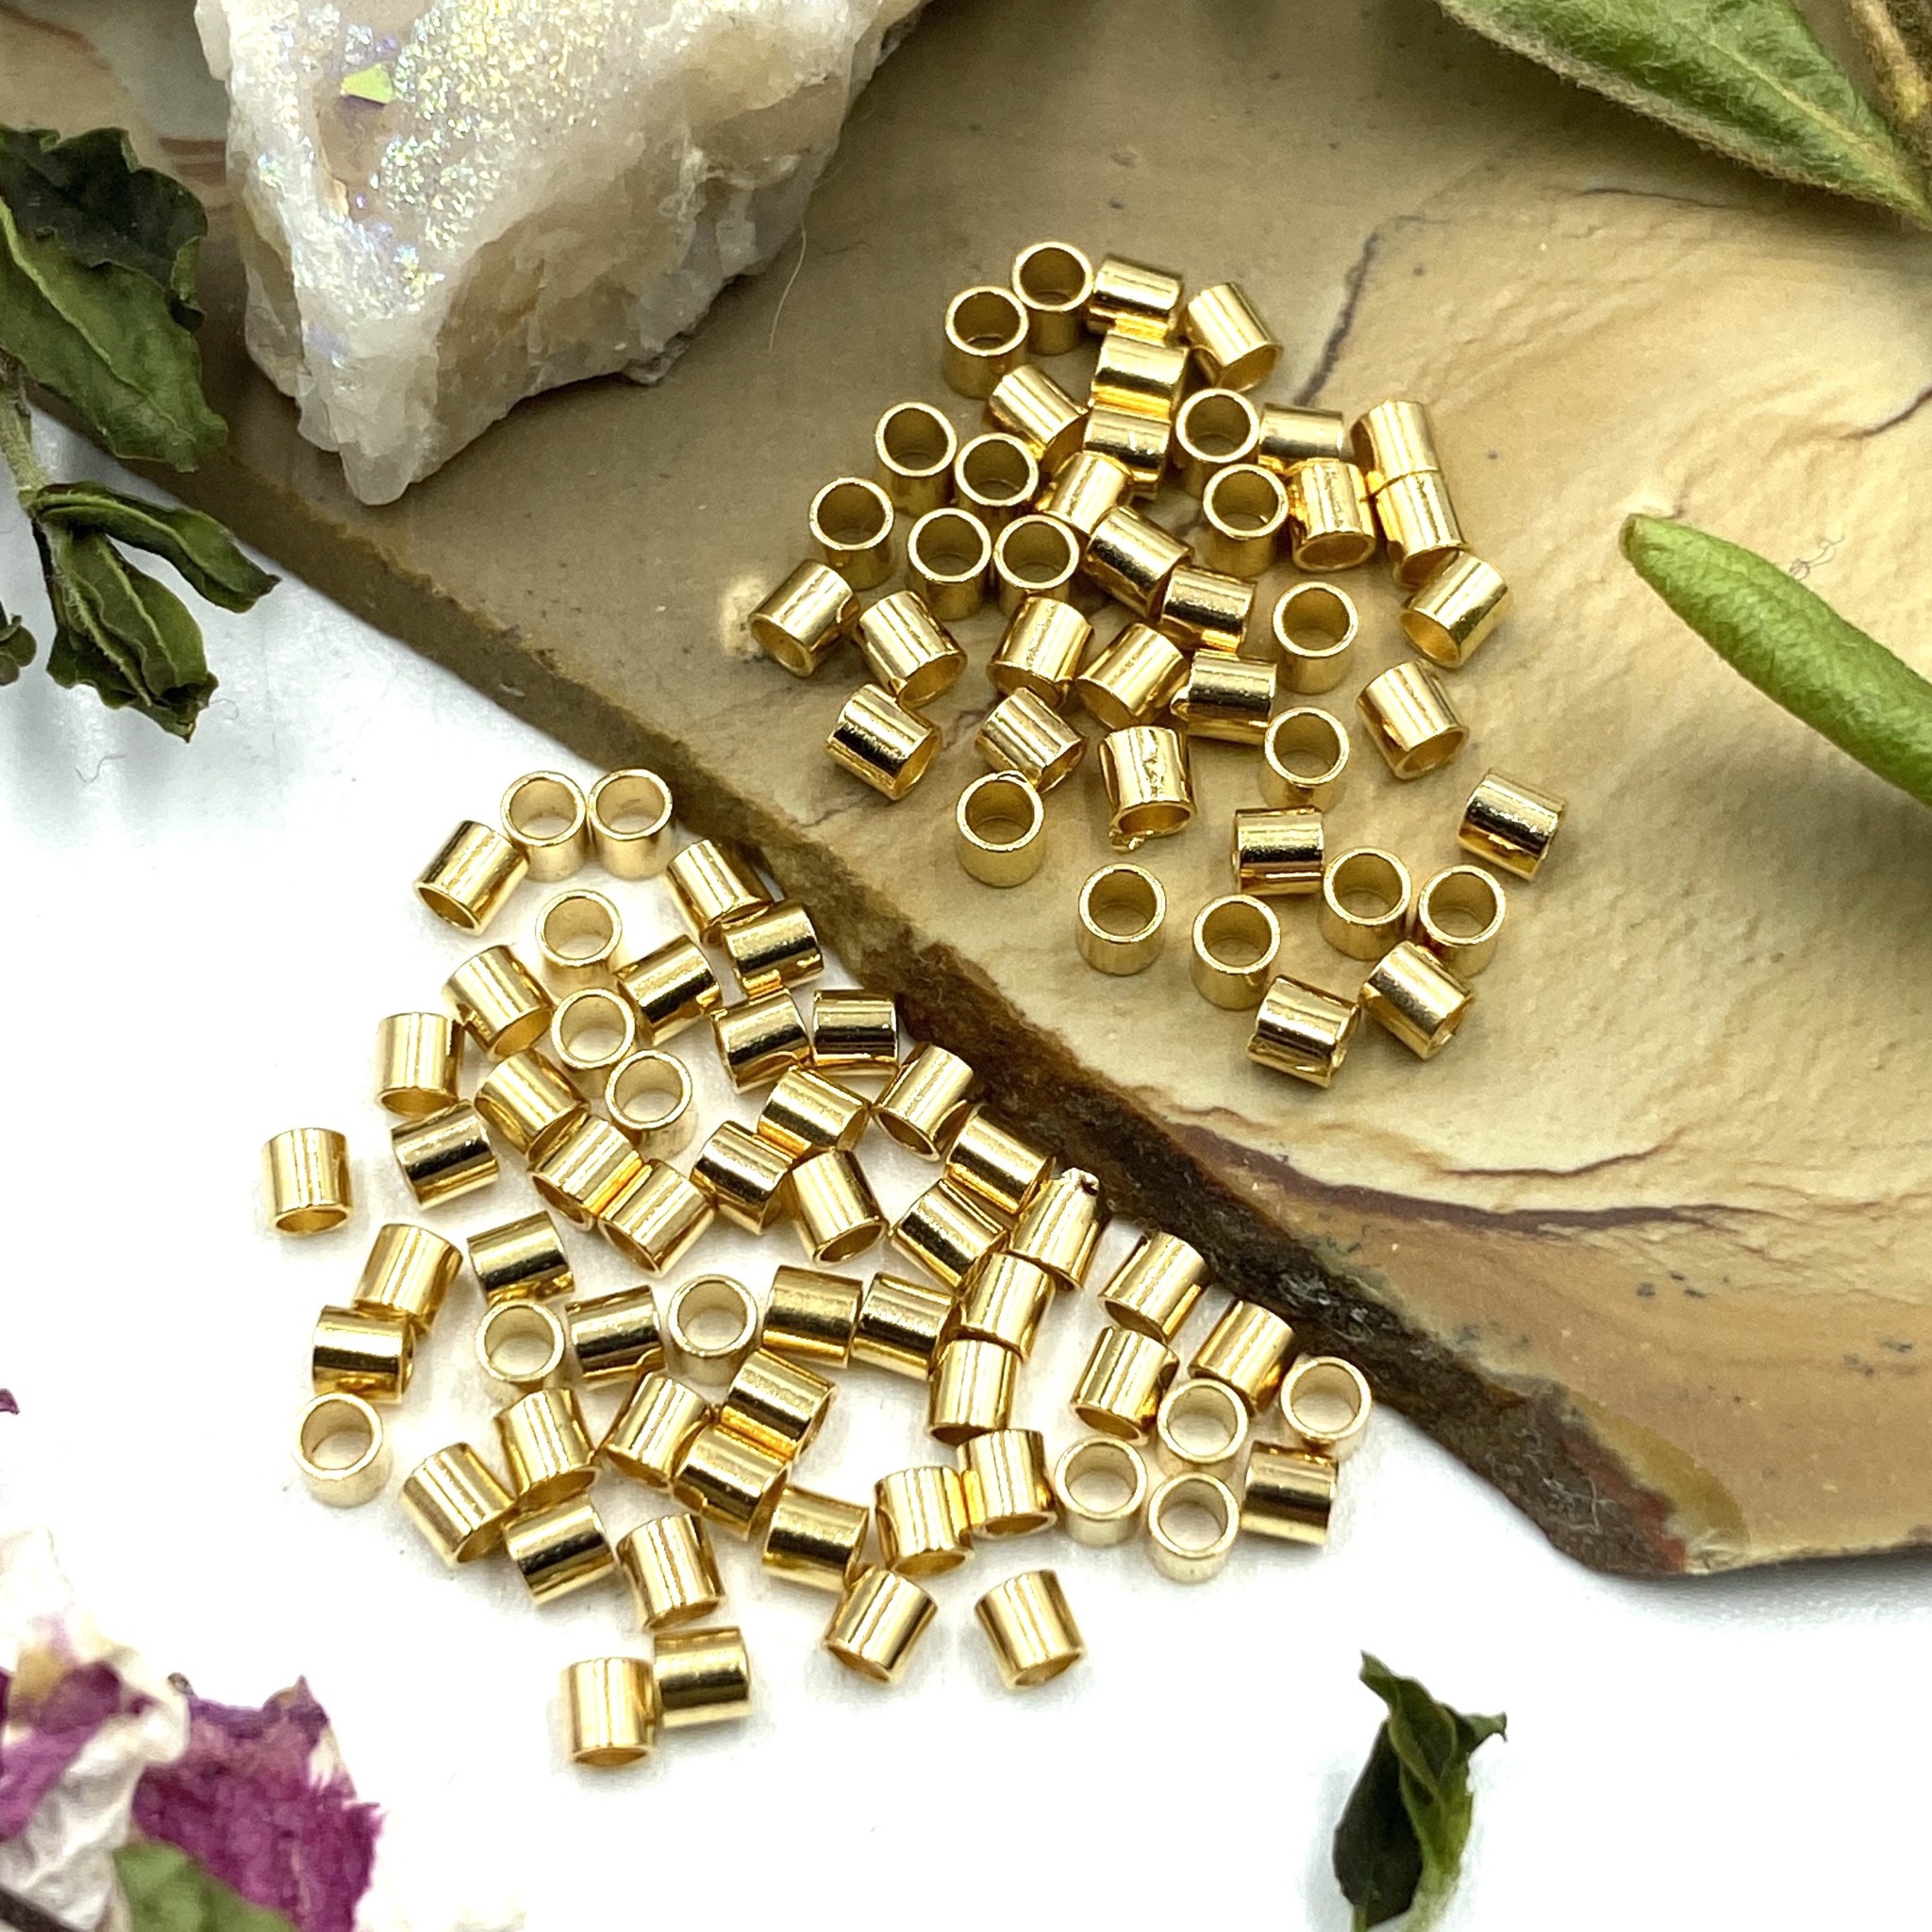 2x2mm Gold Filled Crimp Beads --100ct.